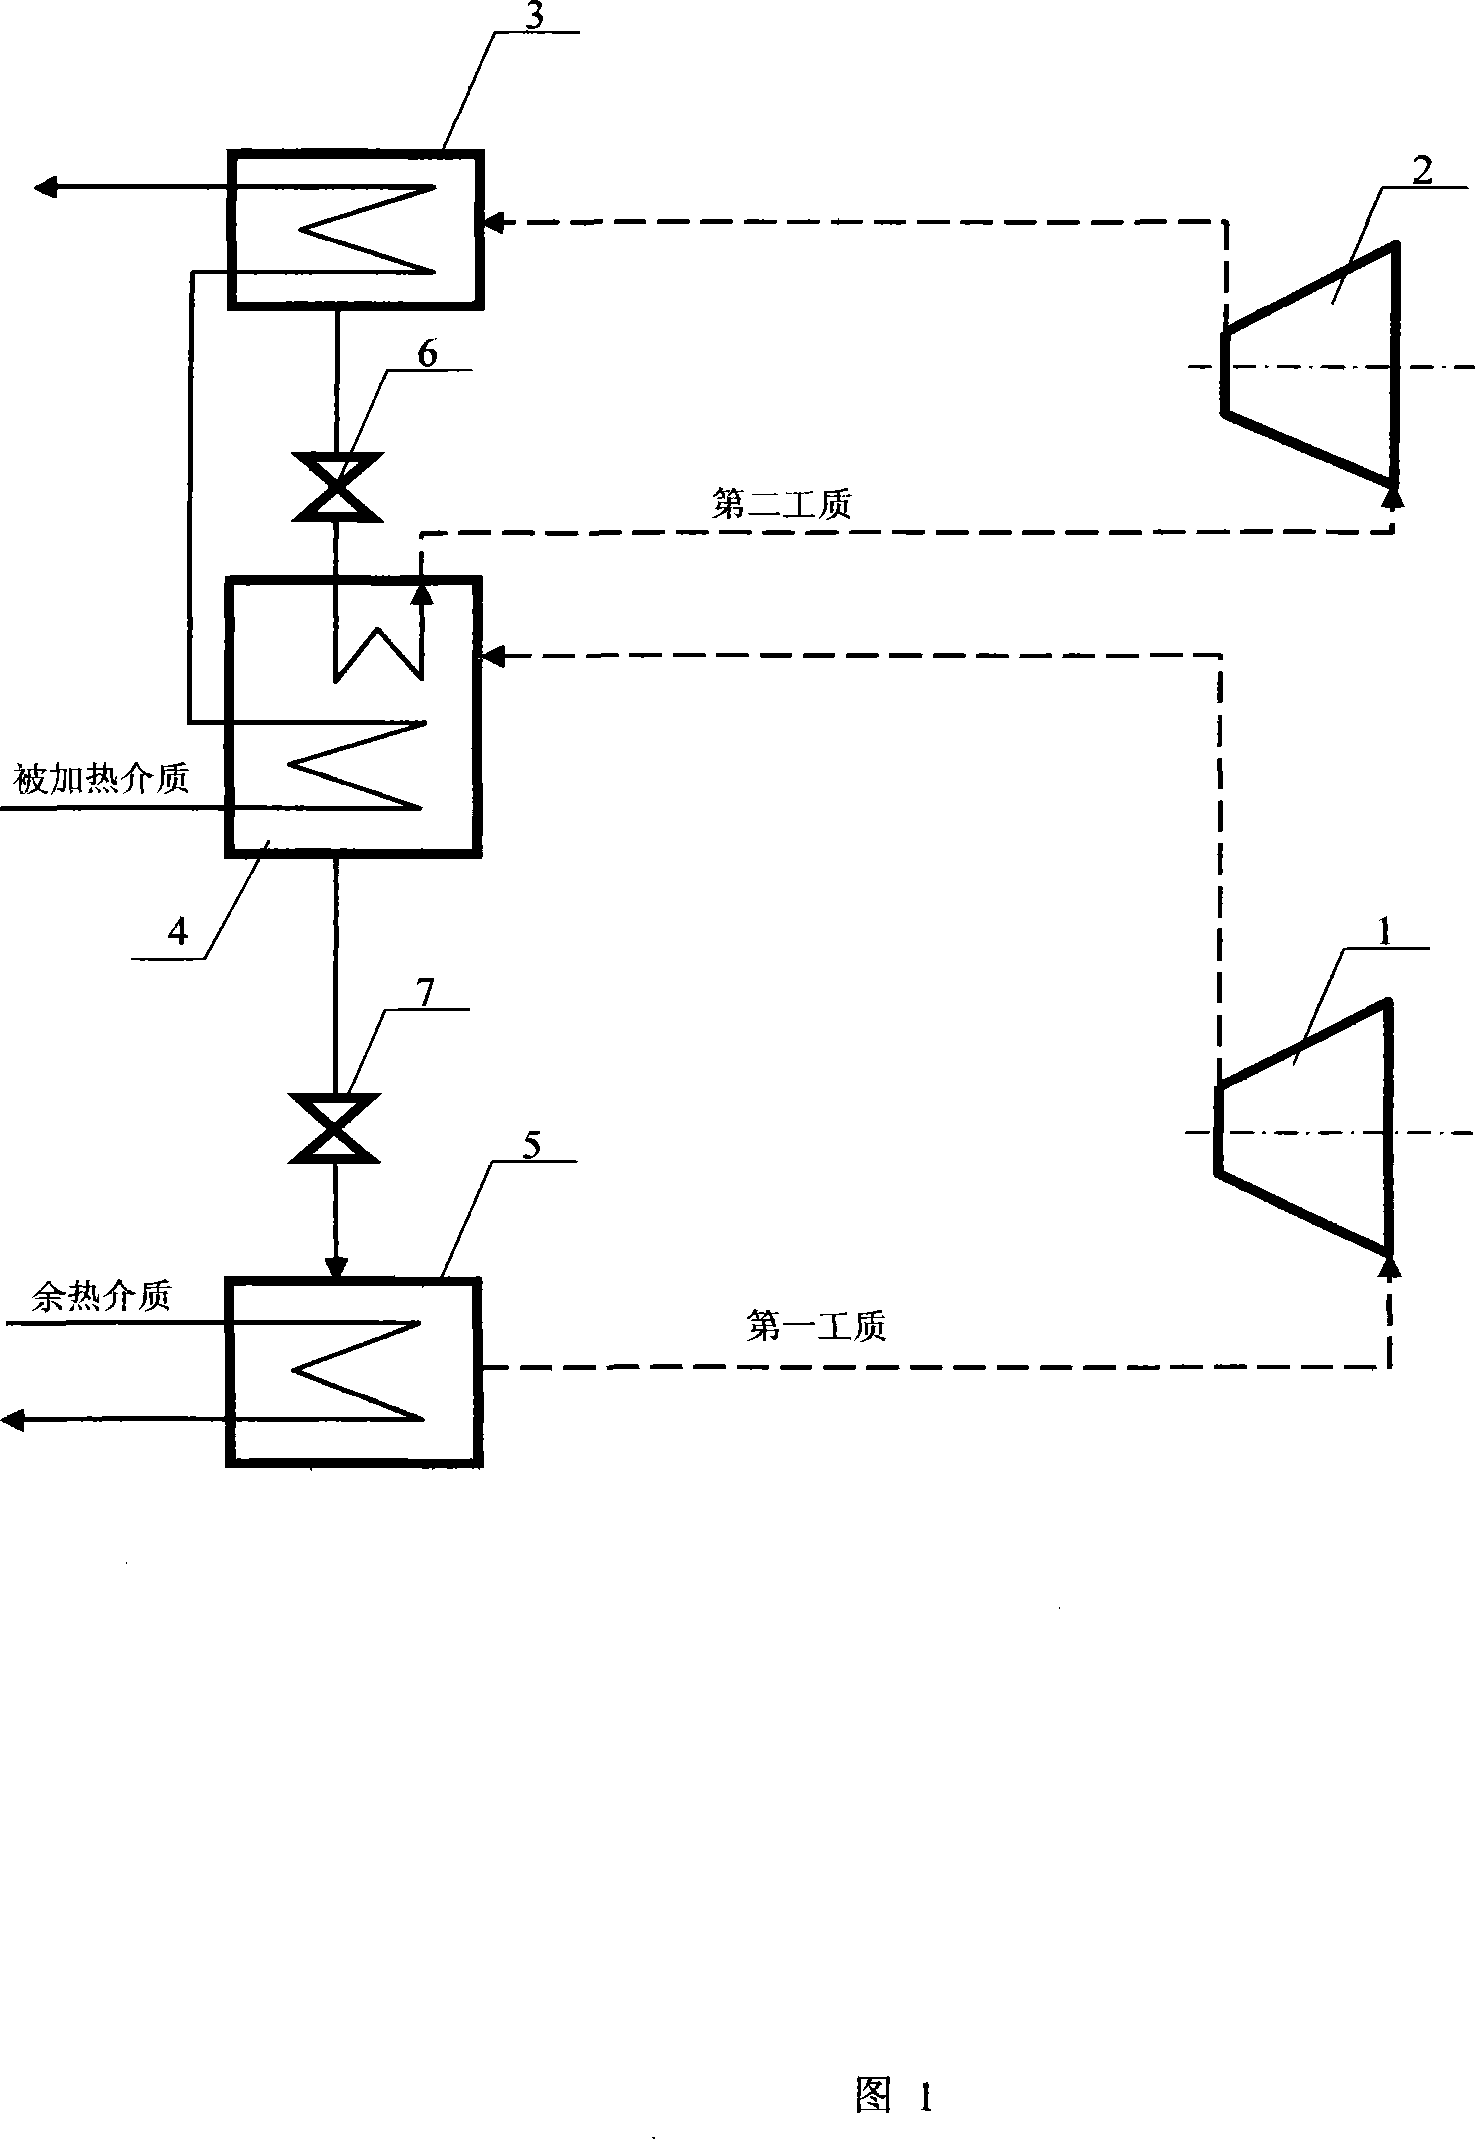 Subsection heat-taking type overlapping heat pump